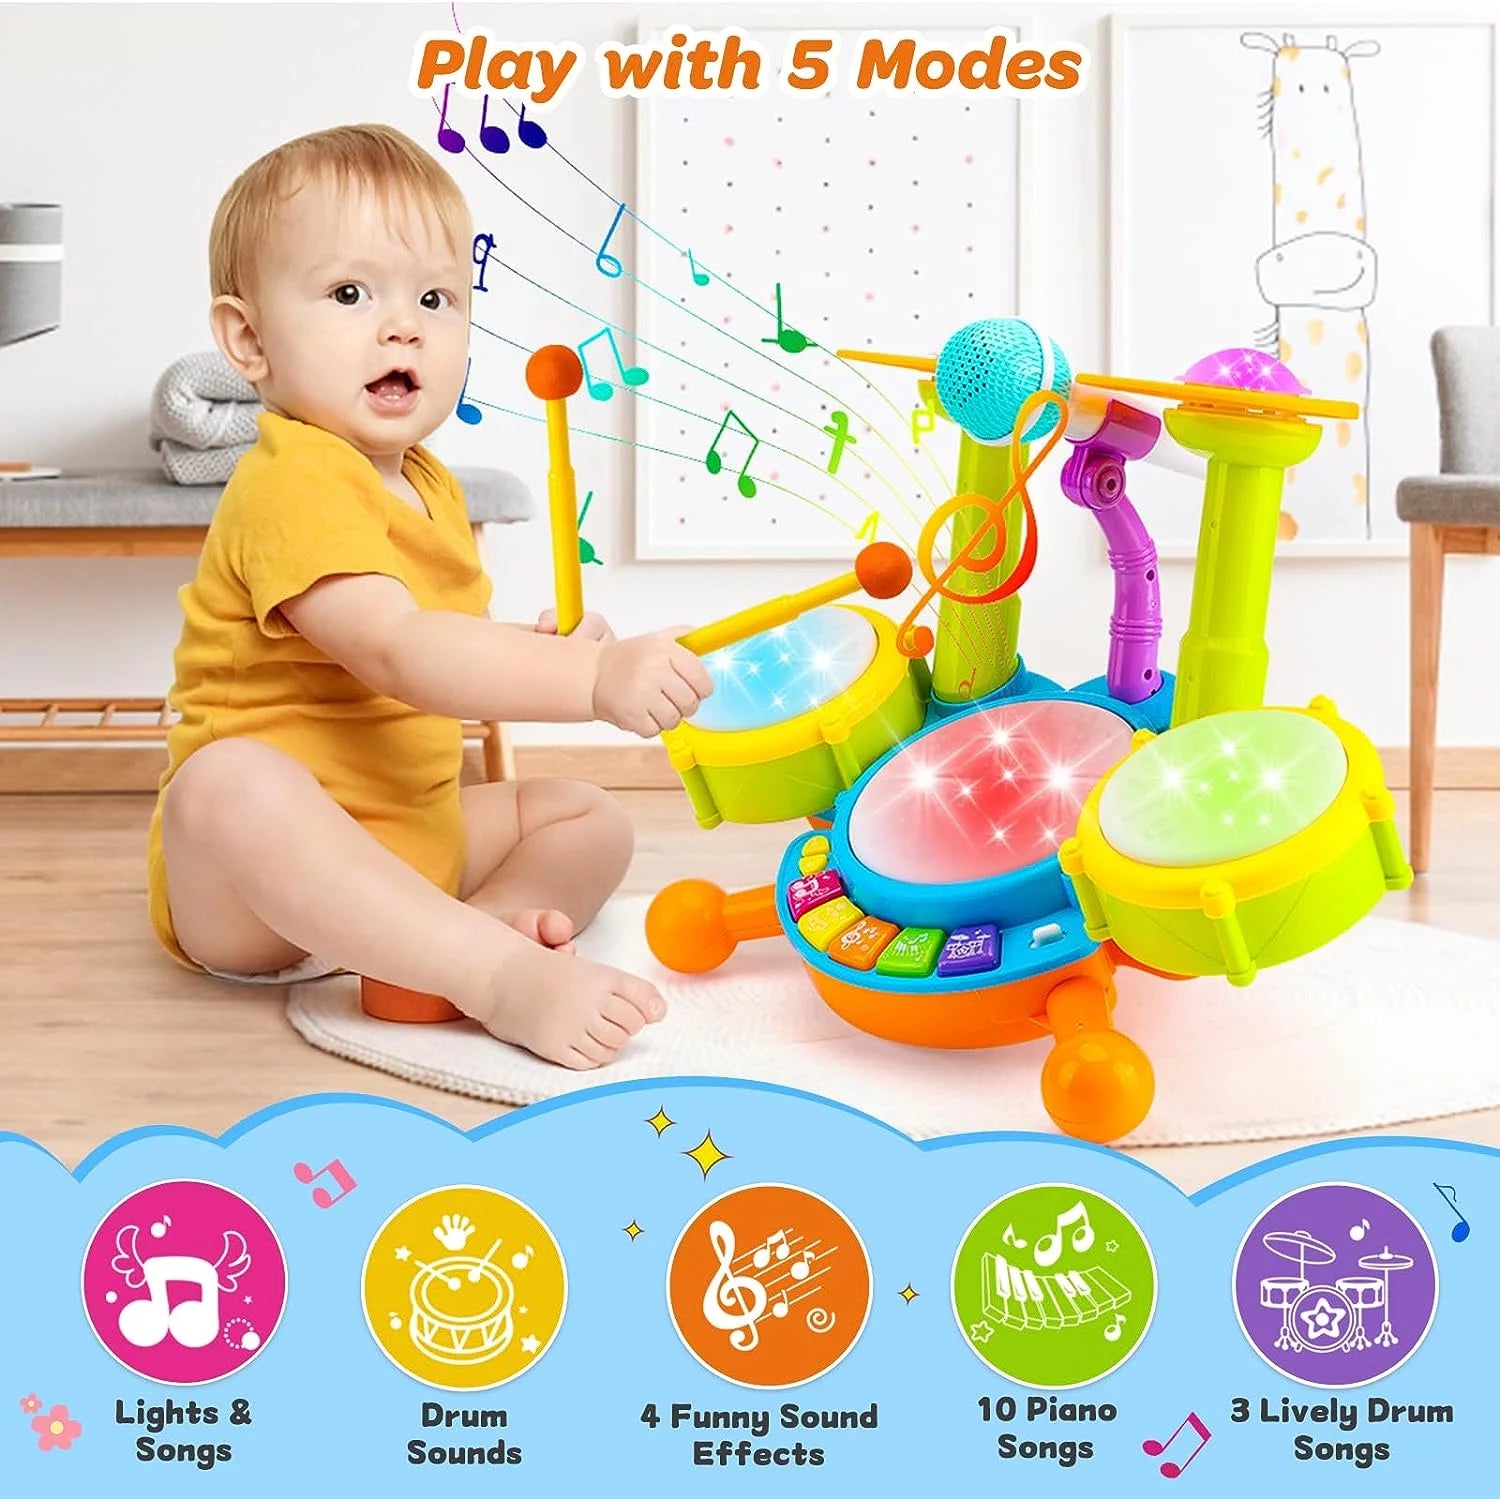 Drum Sets for Kids, Toys for 1 Year Old, Educational Learning Toys for 2 3 4 5 6 Year, Light up Baby Music Toy for Boys Girls Birthday Gift